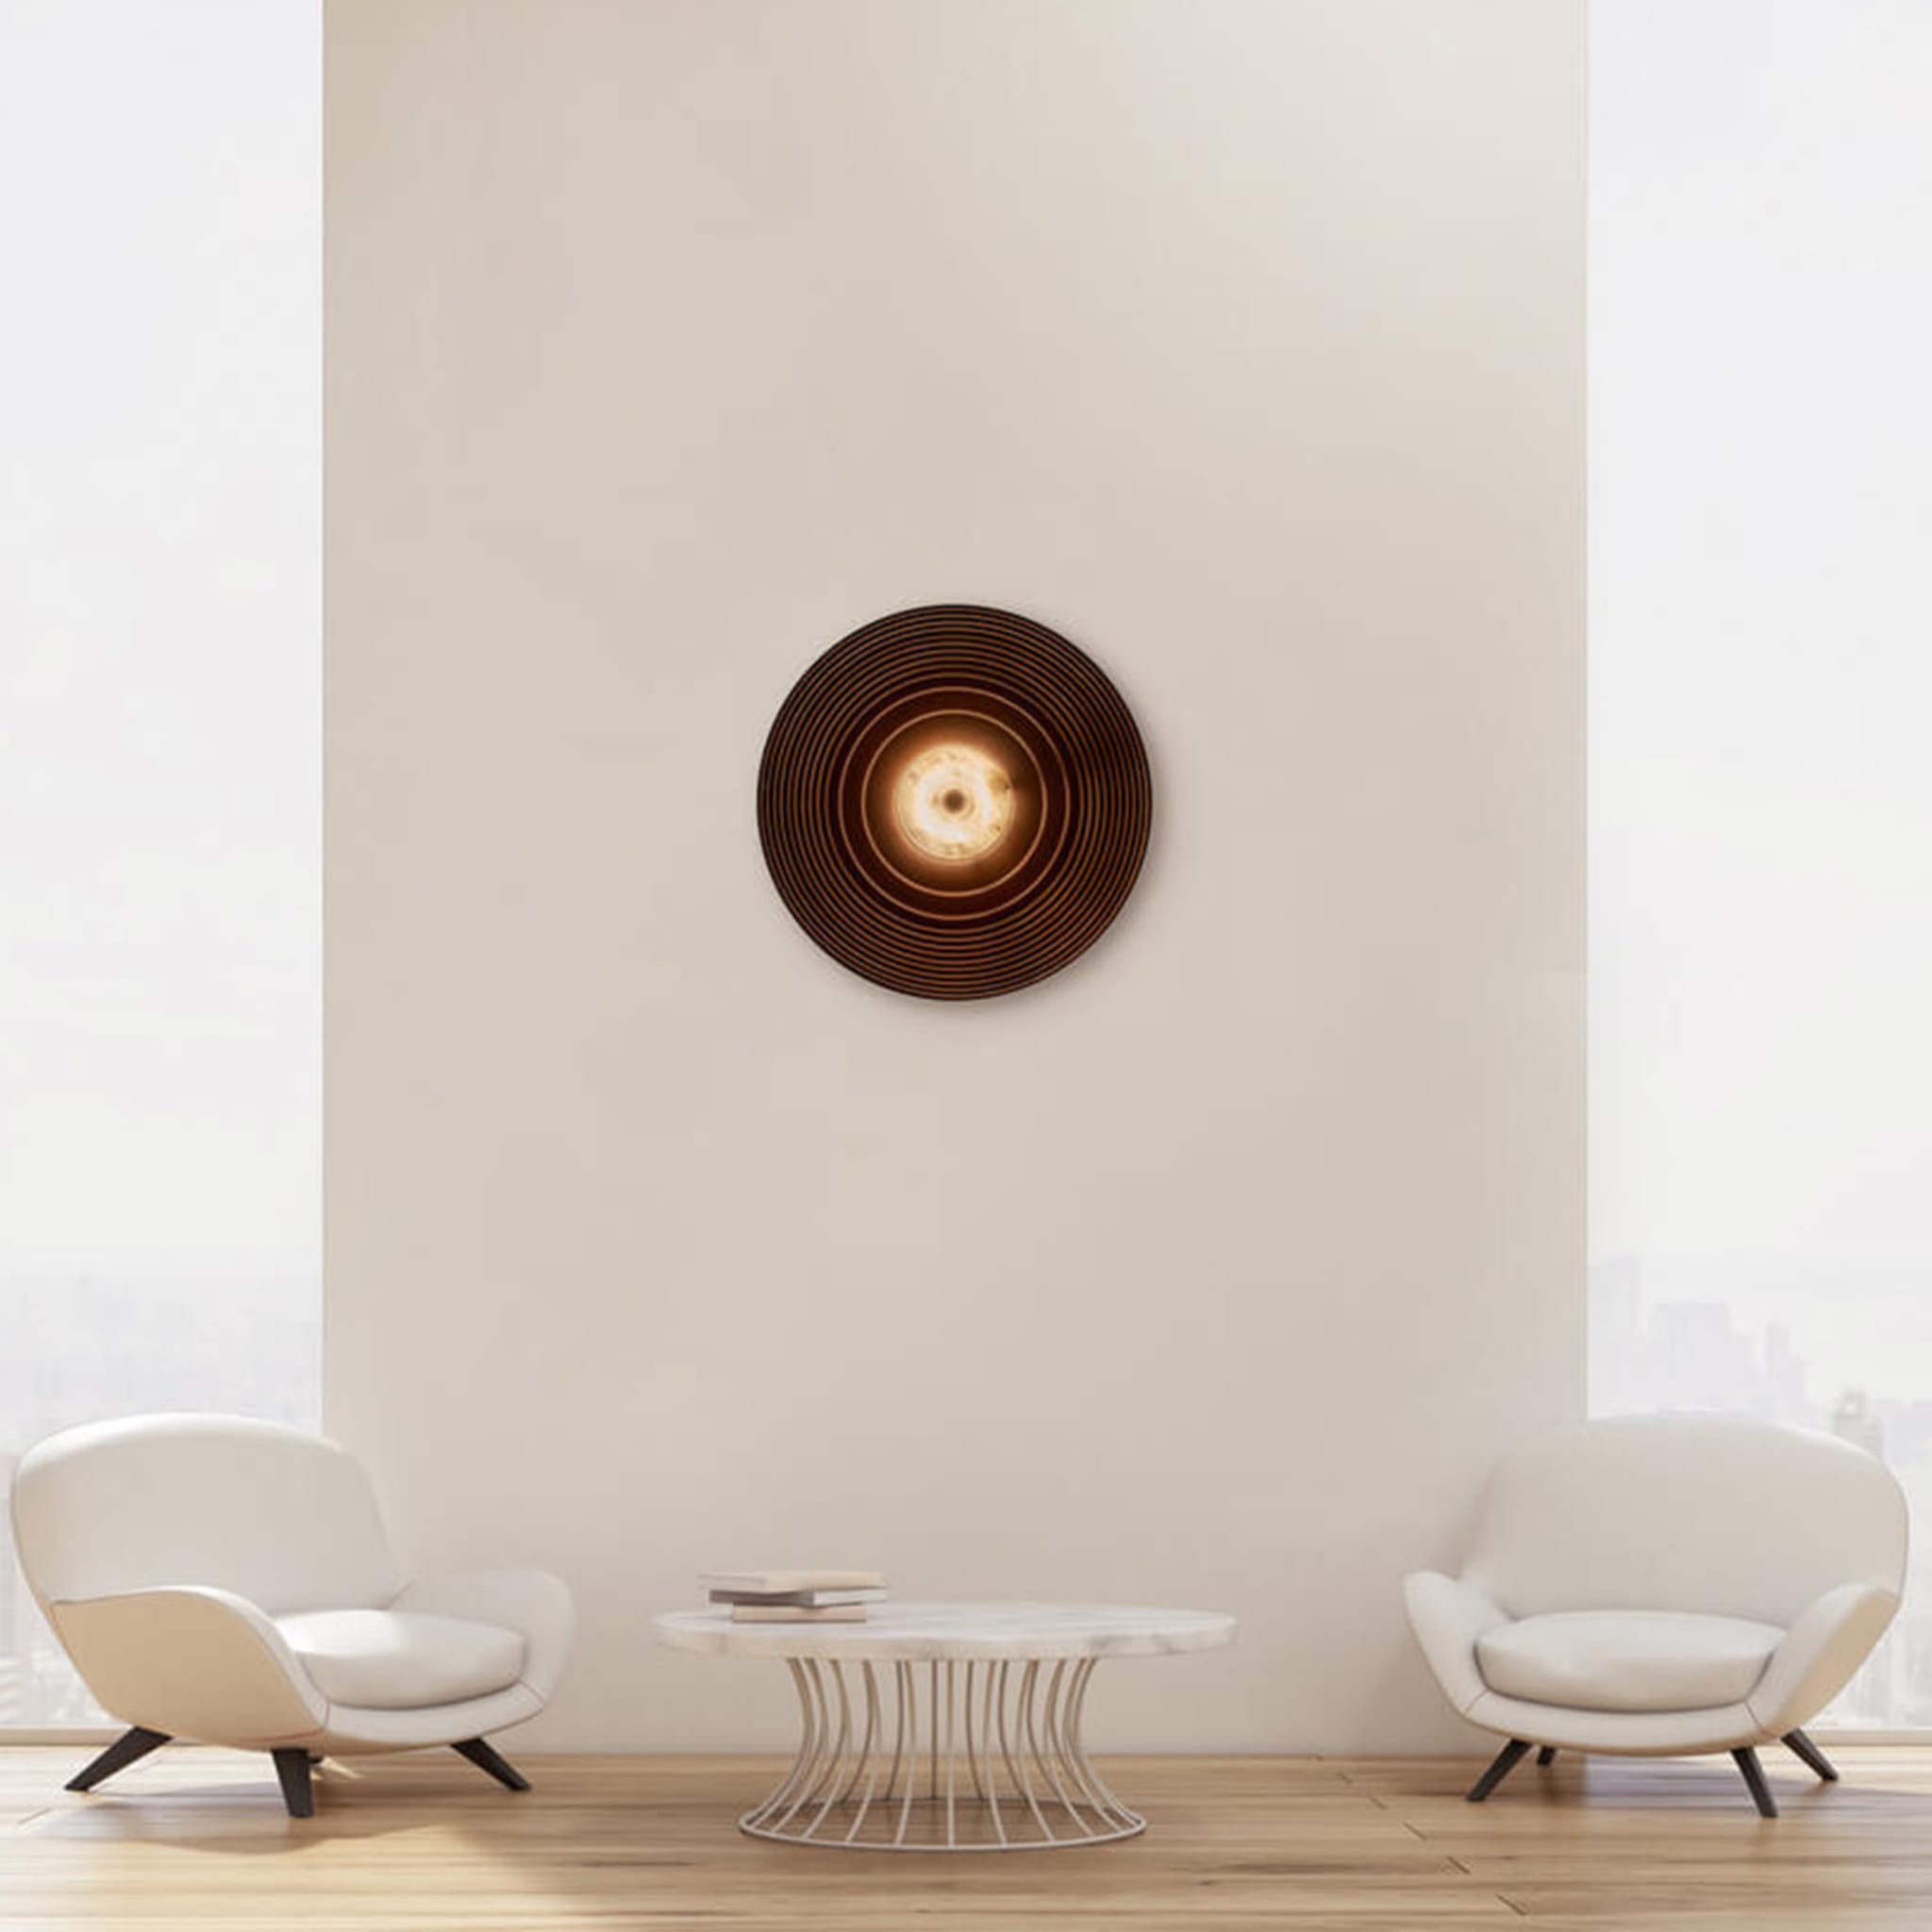 Sculptural Wall Sconce "Gong" By LC Atelier - Alternative view 3